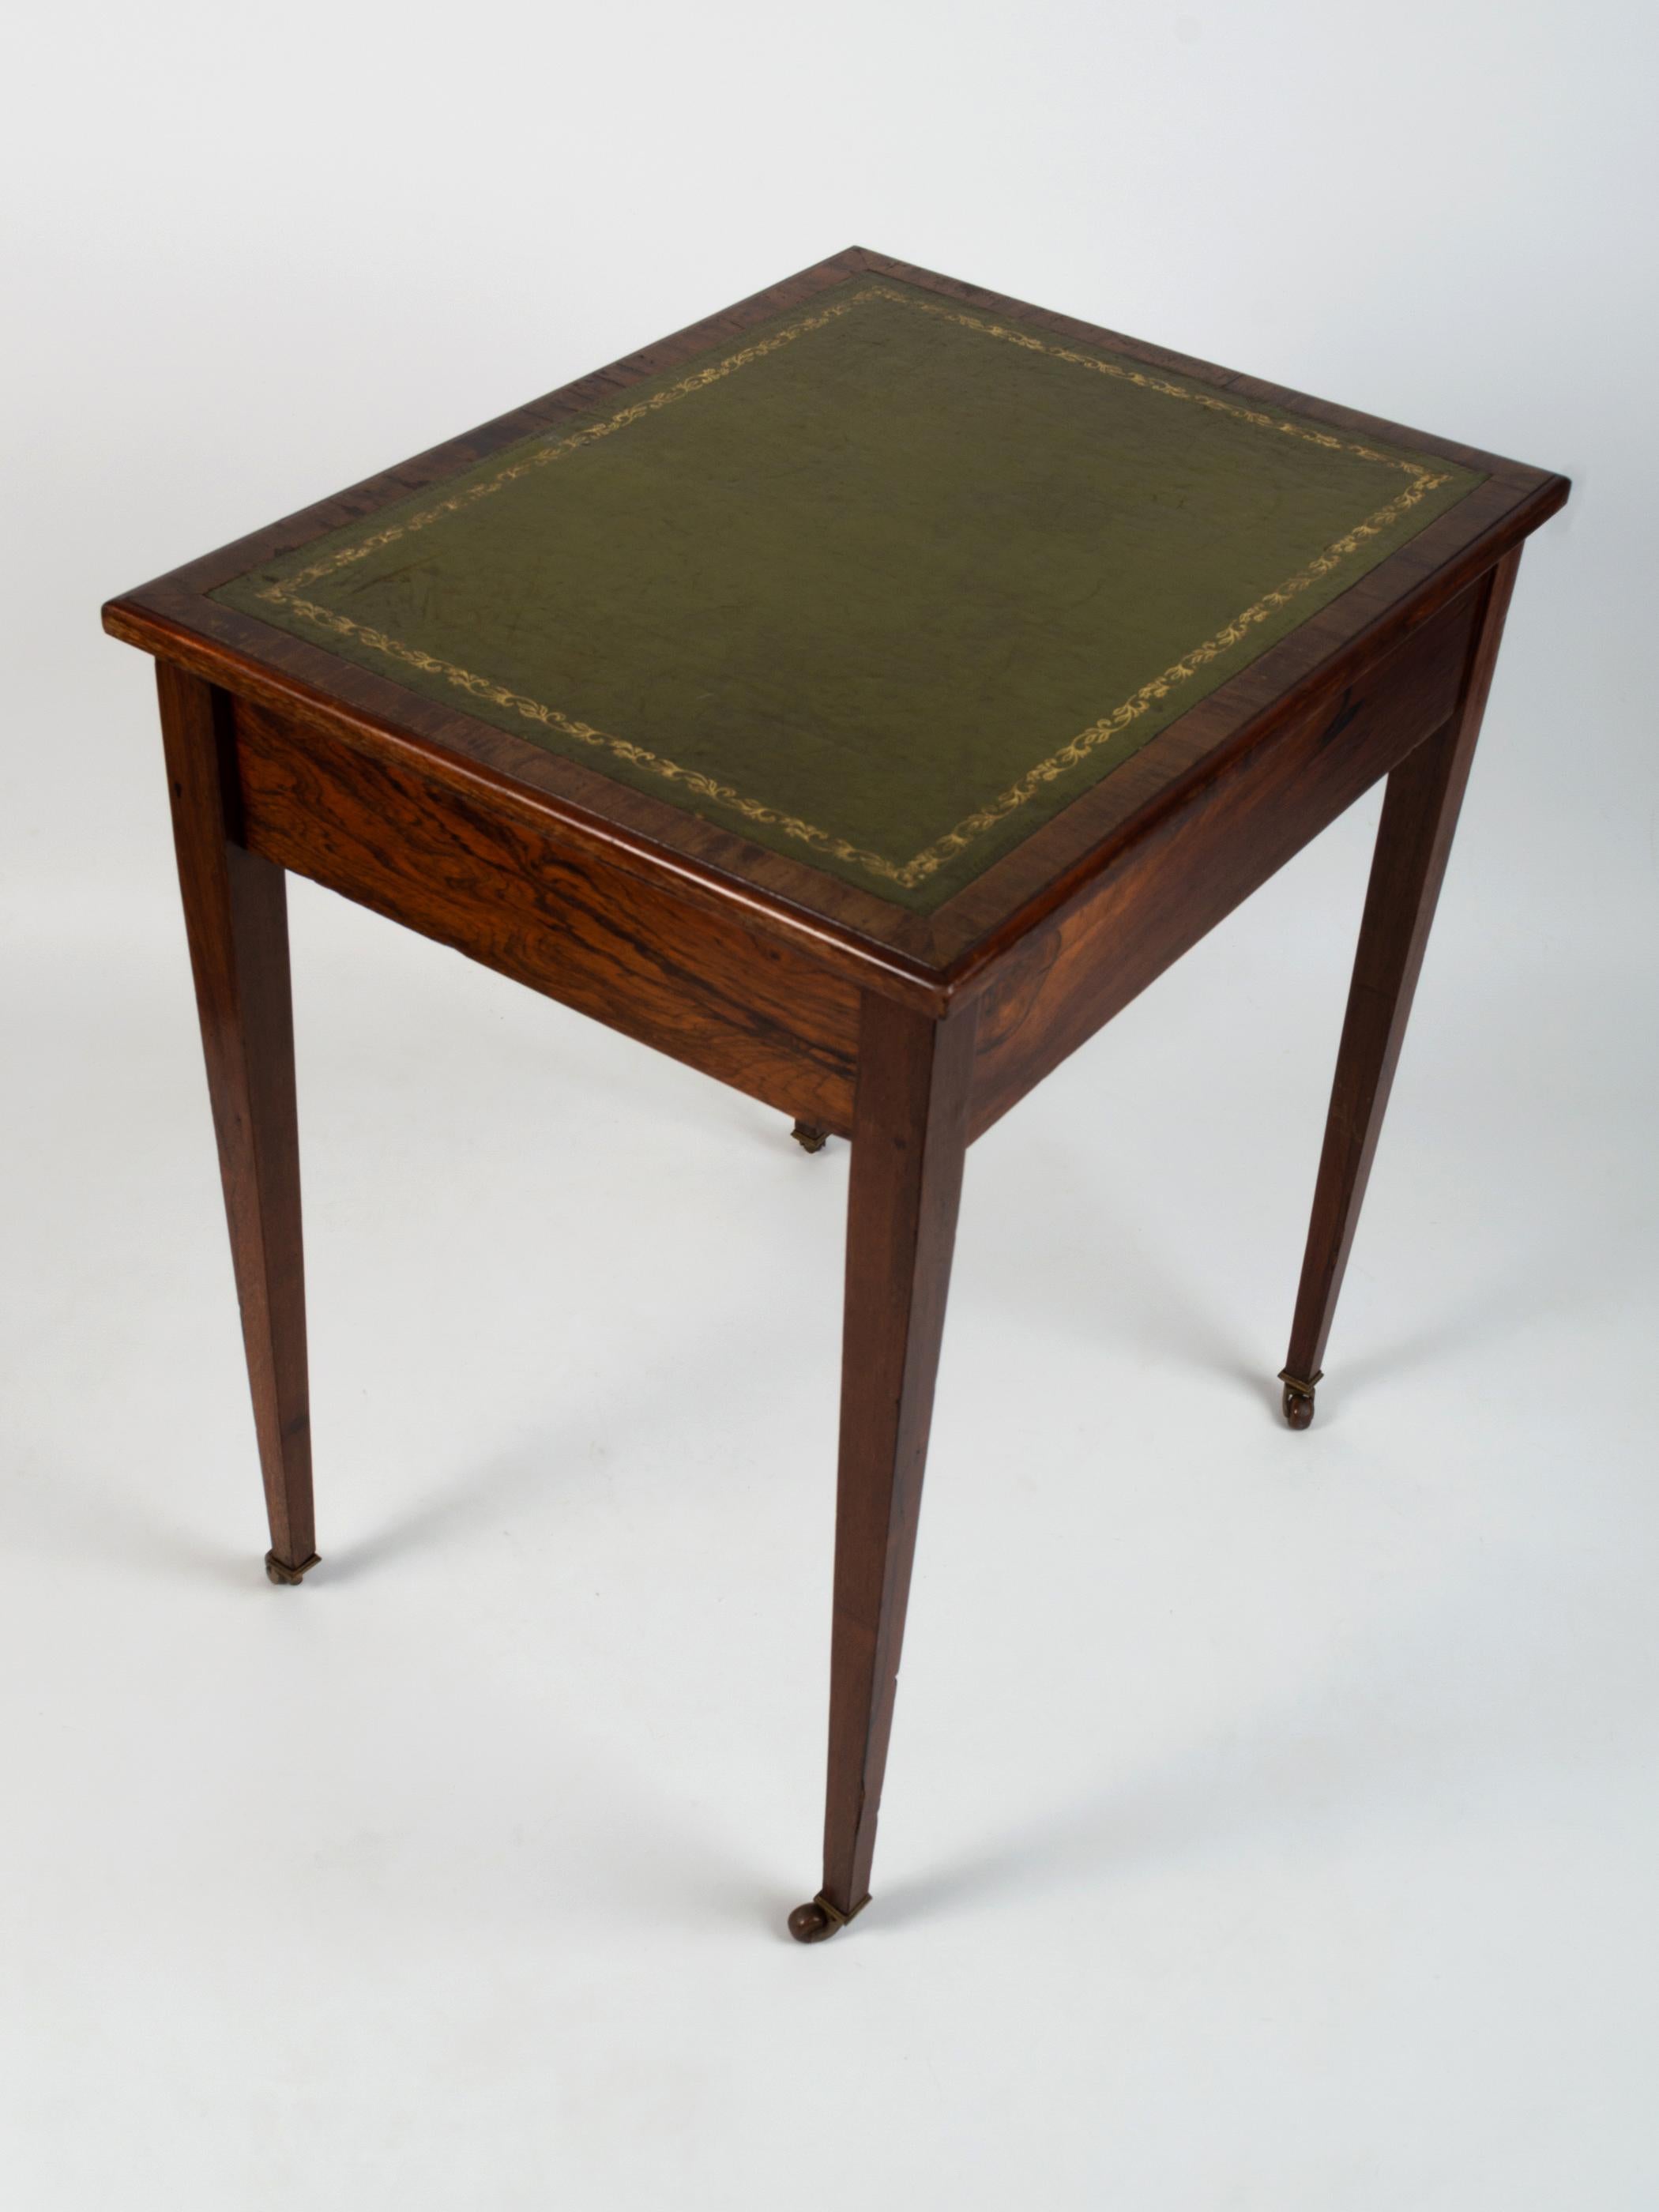 Antique English Georgian Style Rosewood Leather Inlaid Writing Table Desk C.1900 1